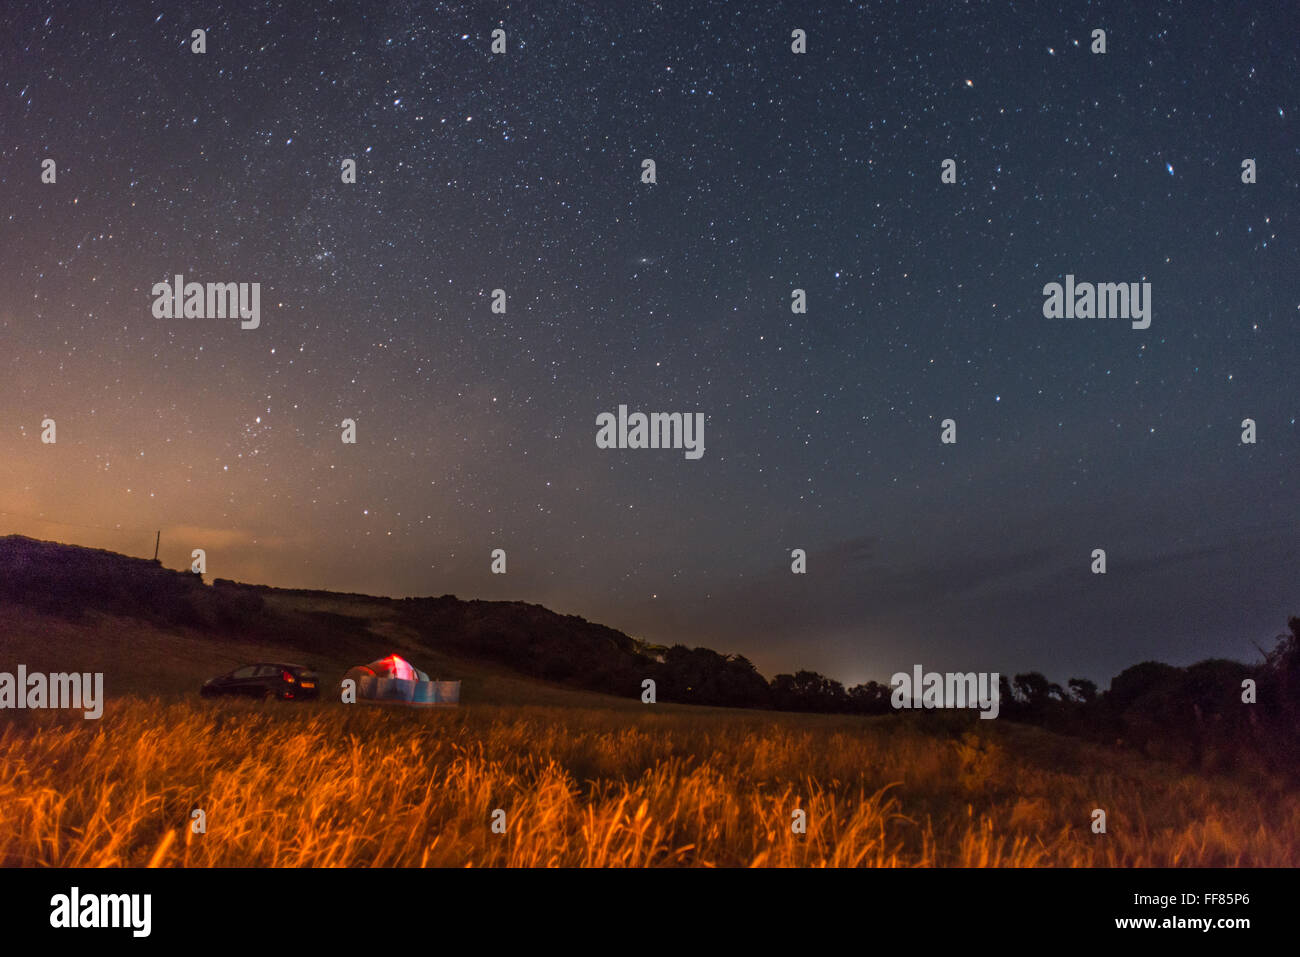 Camping underneath the stars on a clear night in the South Hams of Devon. Stock Photo